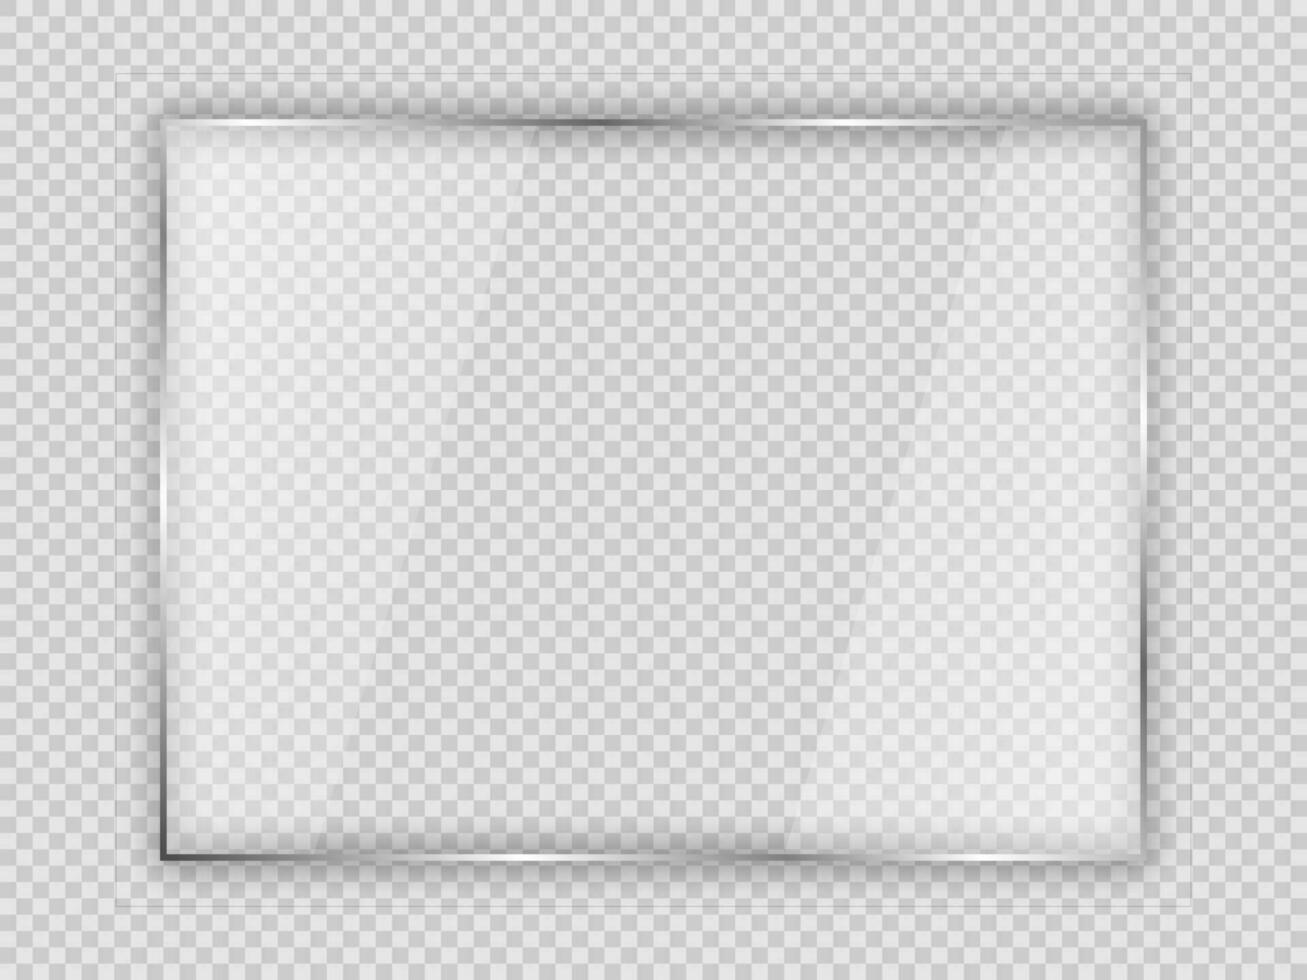 Glass plate in rectangle frame isolated vector